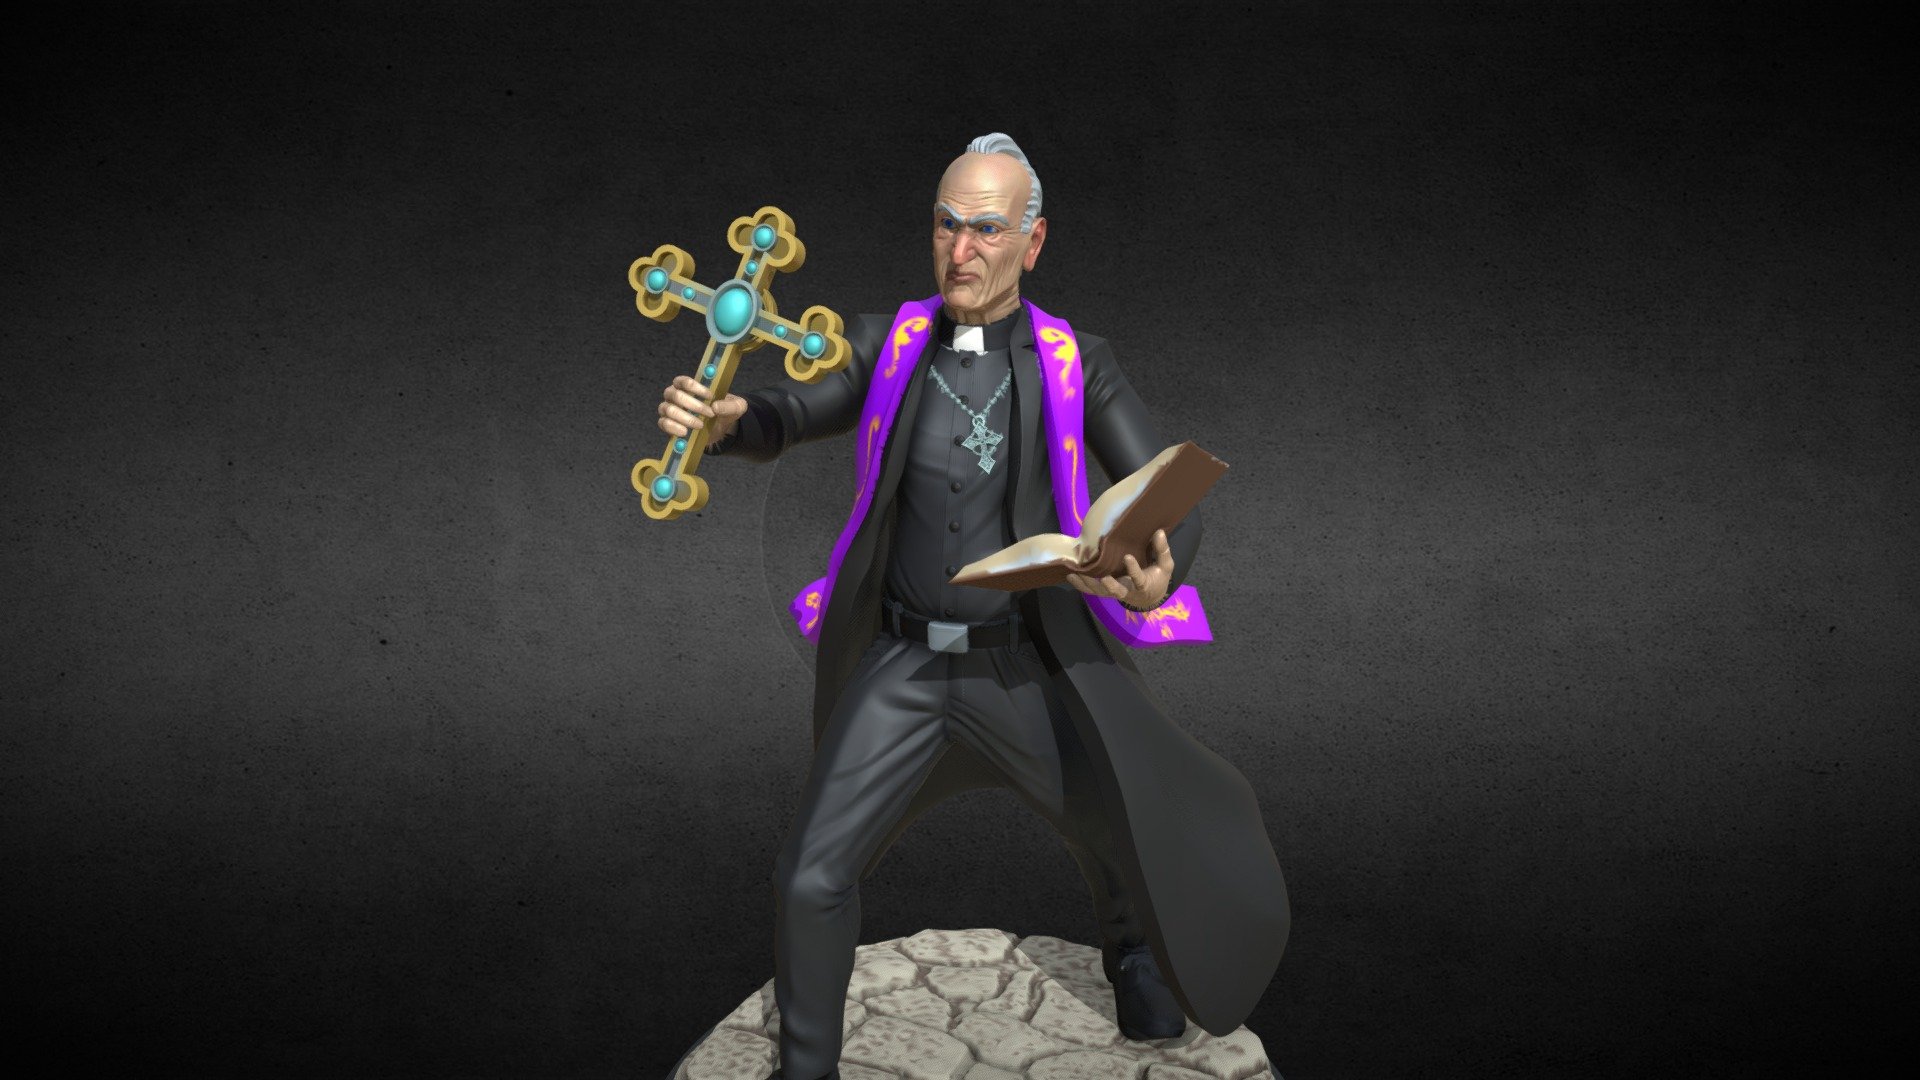 Modeling exorcist miniature for game call off cthulhu inspirad in character nerdcast rpg call of cthulhu jovem nerd e azagal. DonAzagal

 - Exorcist Call Of Cuthulhu - Buy Royalty Free 3D model by Messias_Scrap 3d model